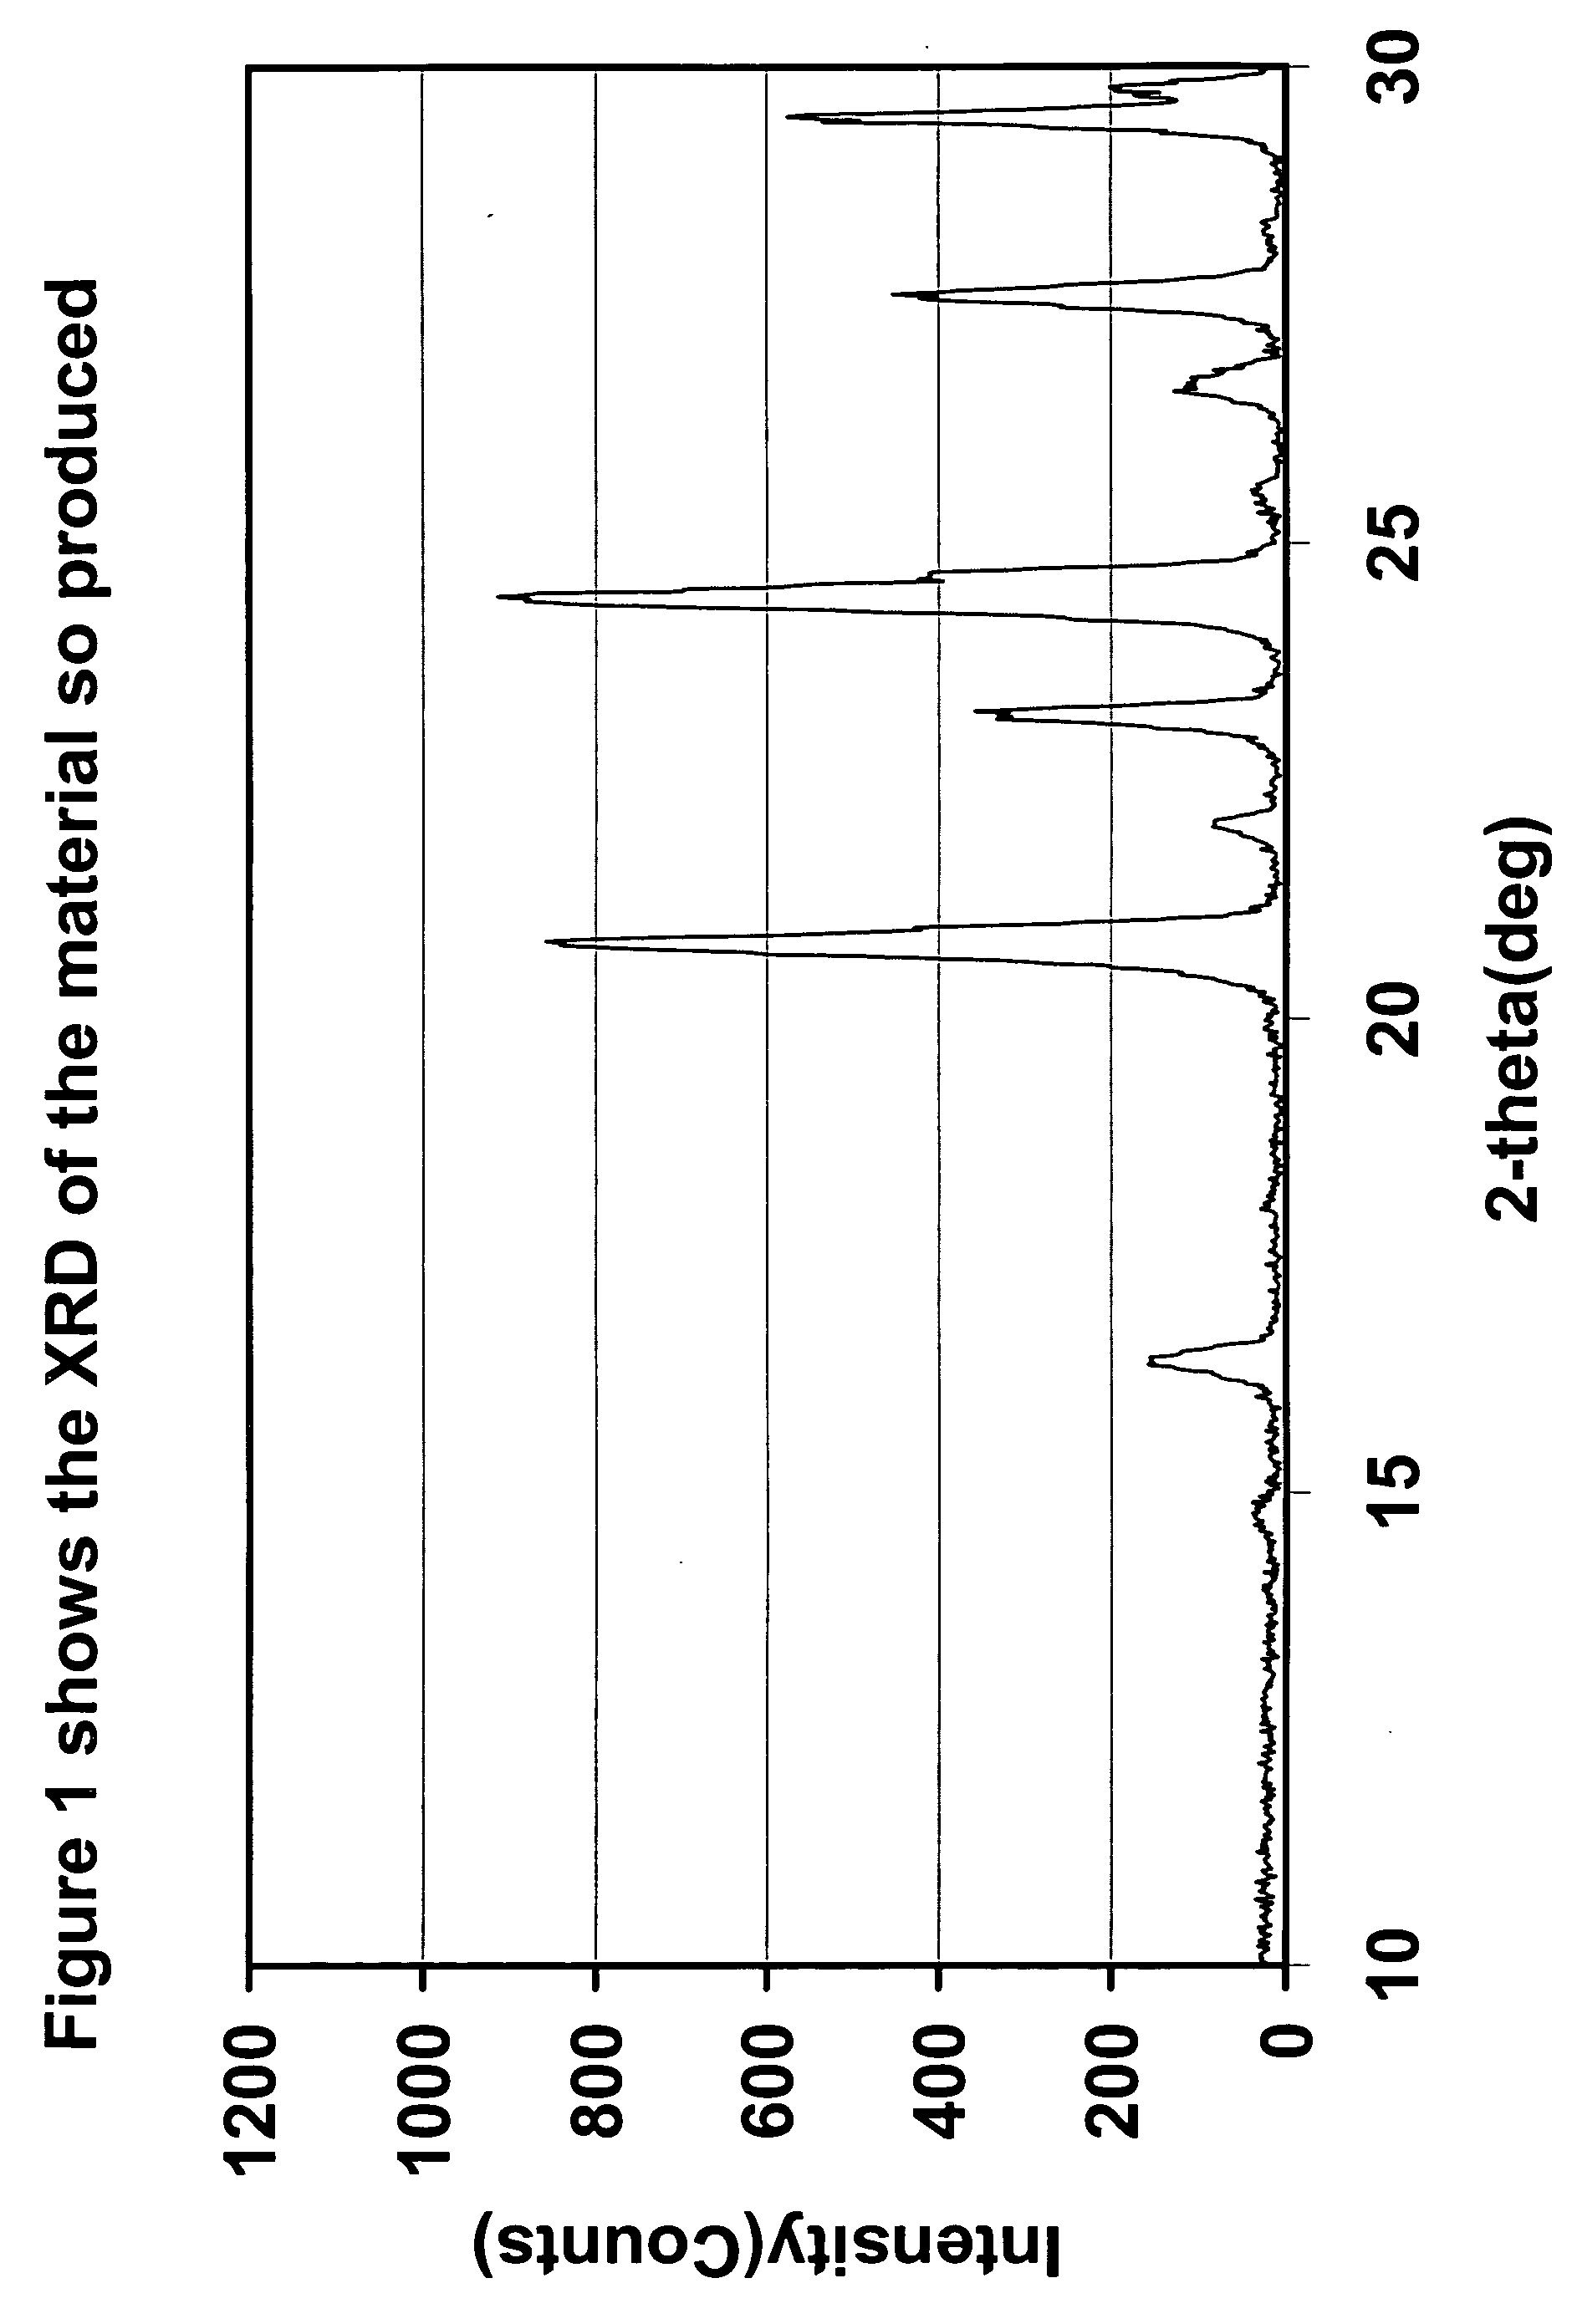 Synthesis of cathode active materials